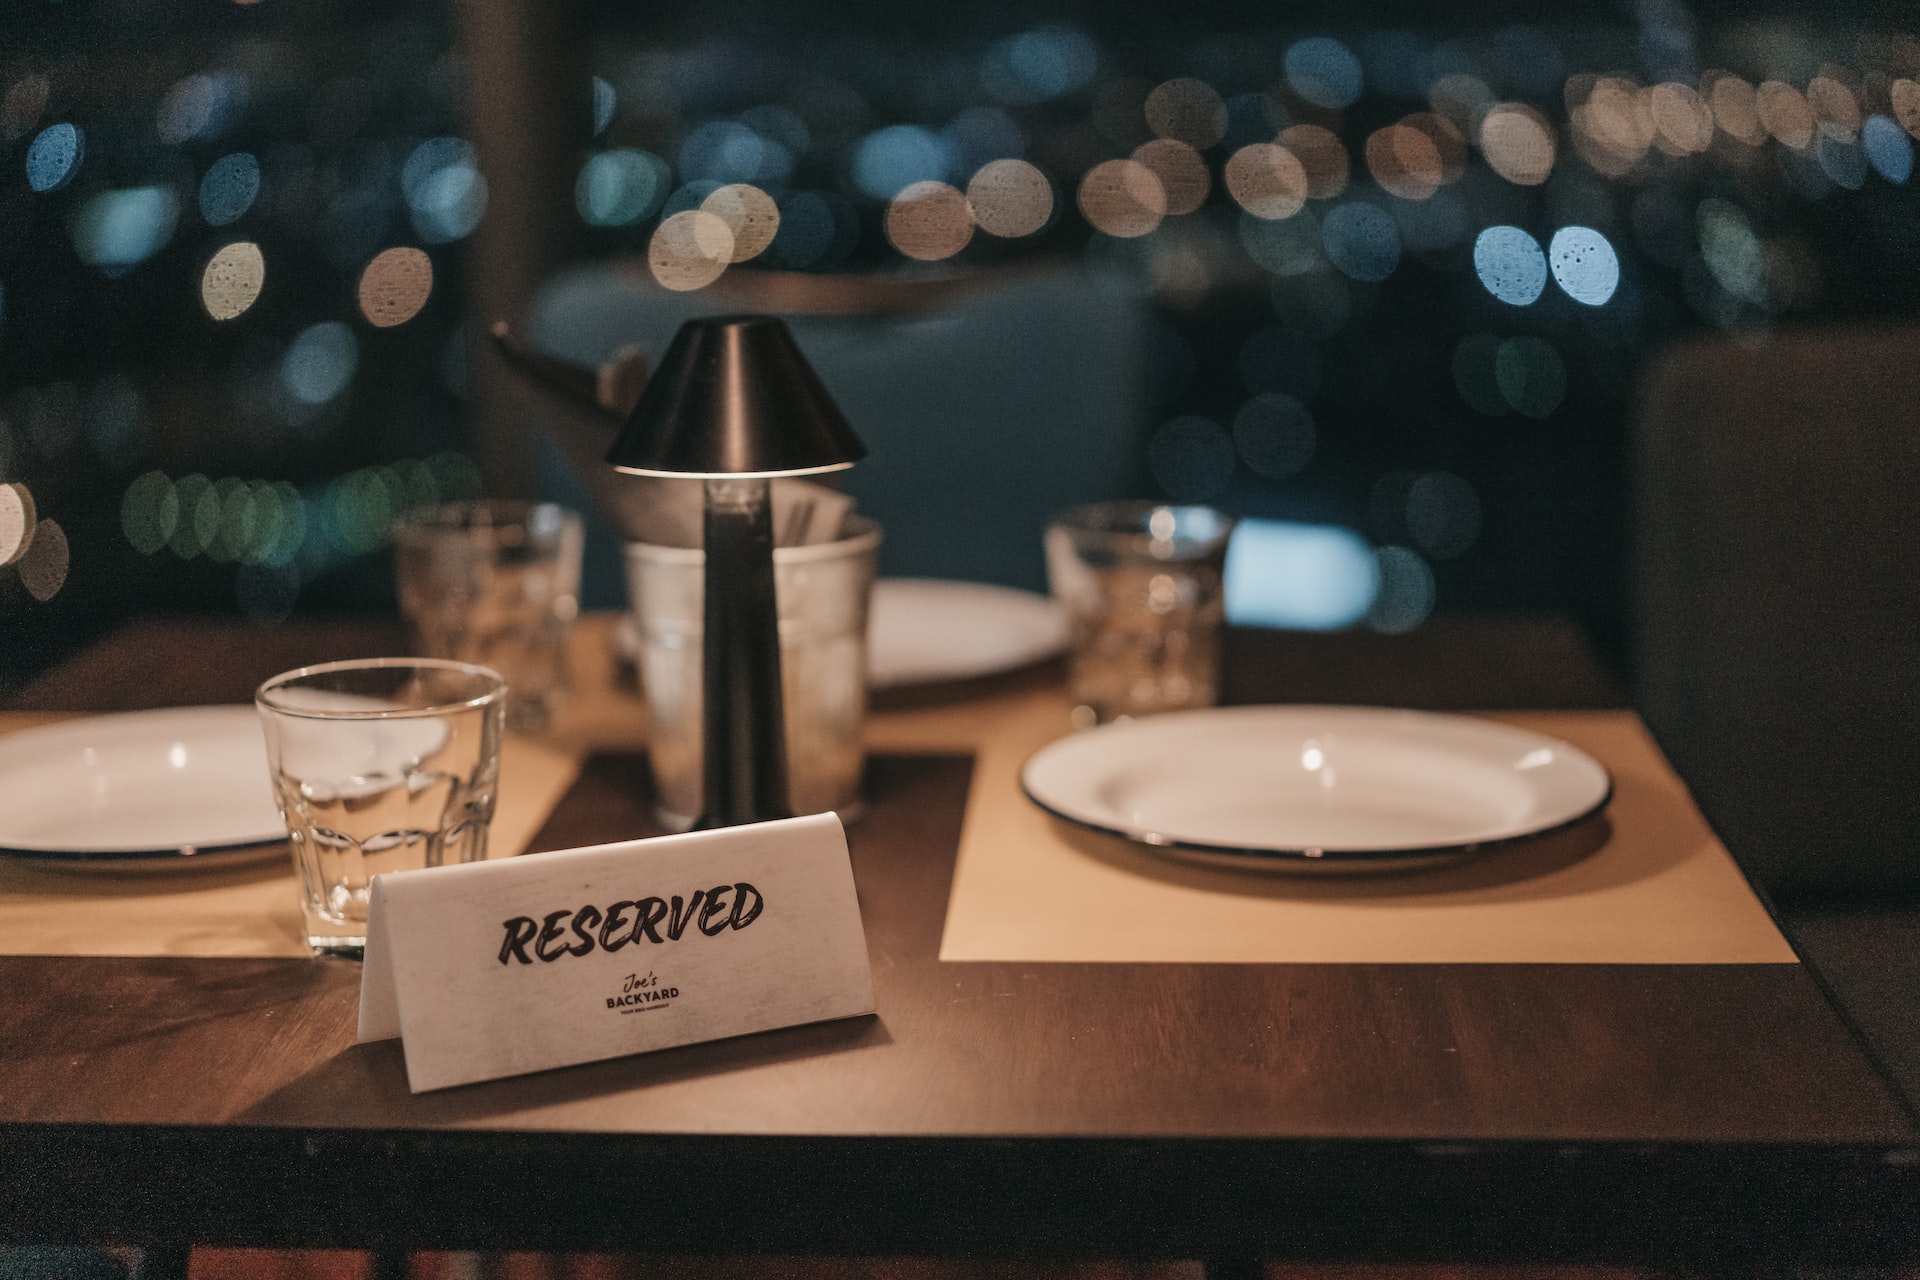 White tablecloth dinner table at night with a reserved sign.